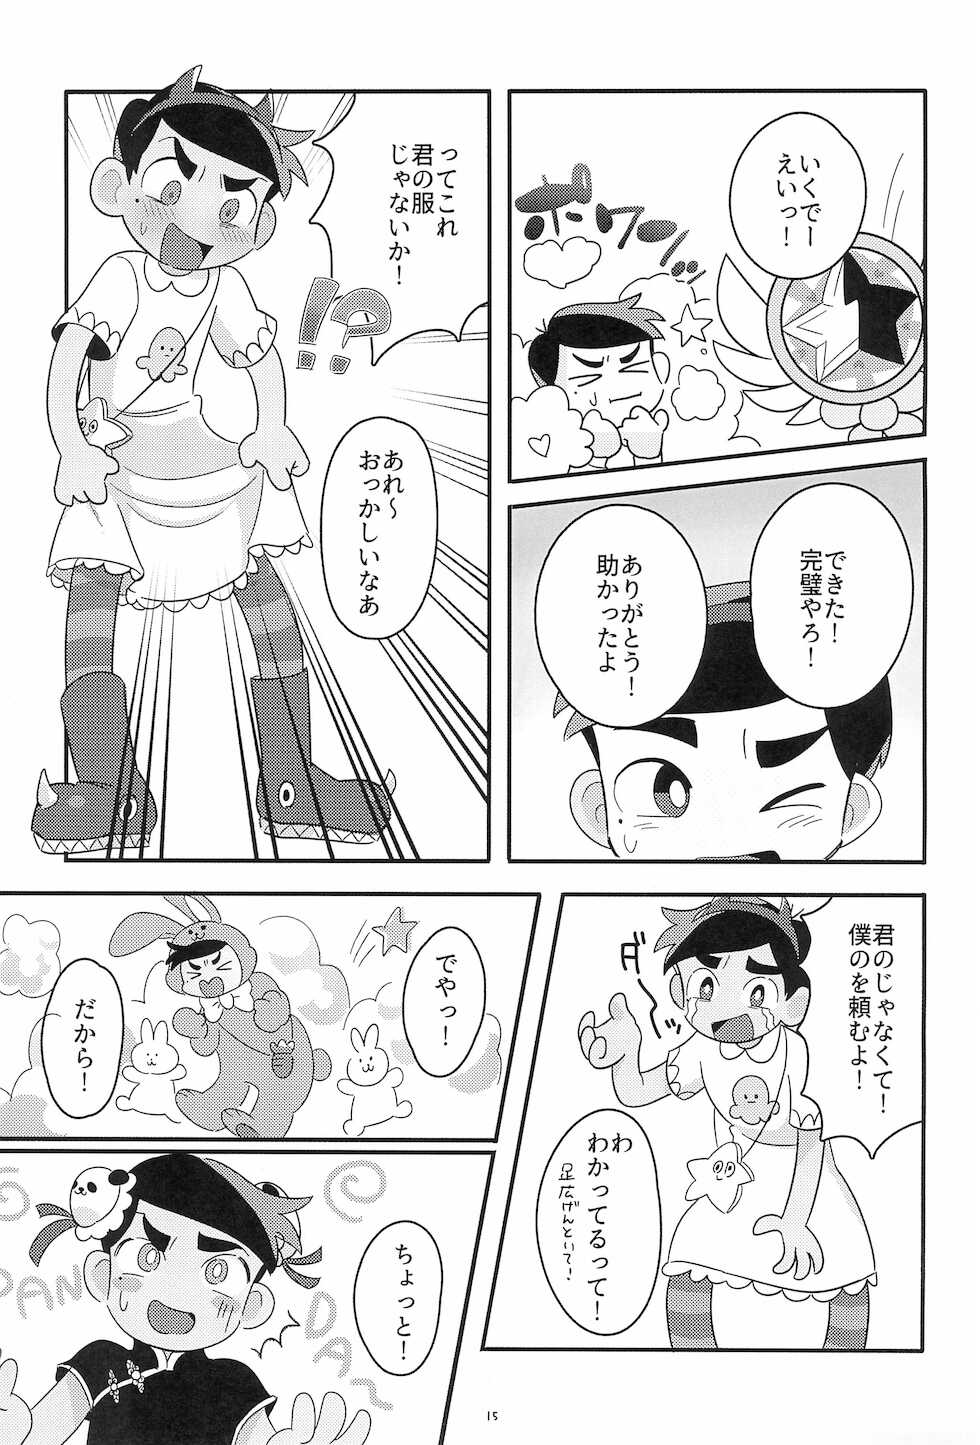 (C92) ["AAA" UDON SHOP (Moccha, Hanya)] Fashion MONSTER Party (Star vs. The Forces of Evil) - Page 19